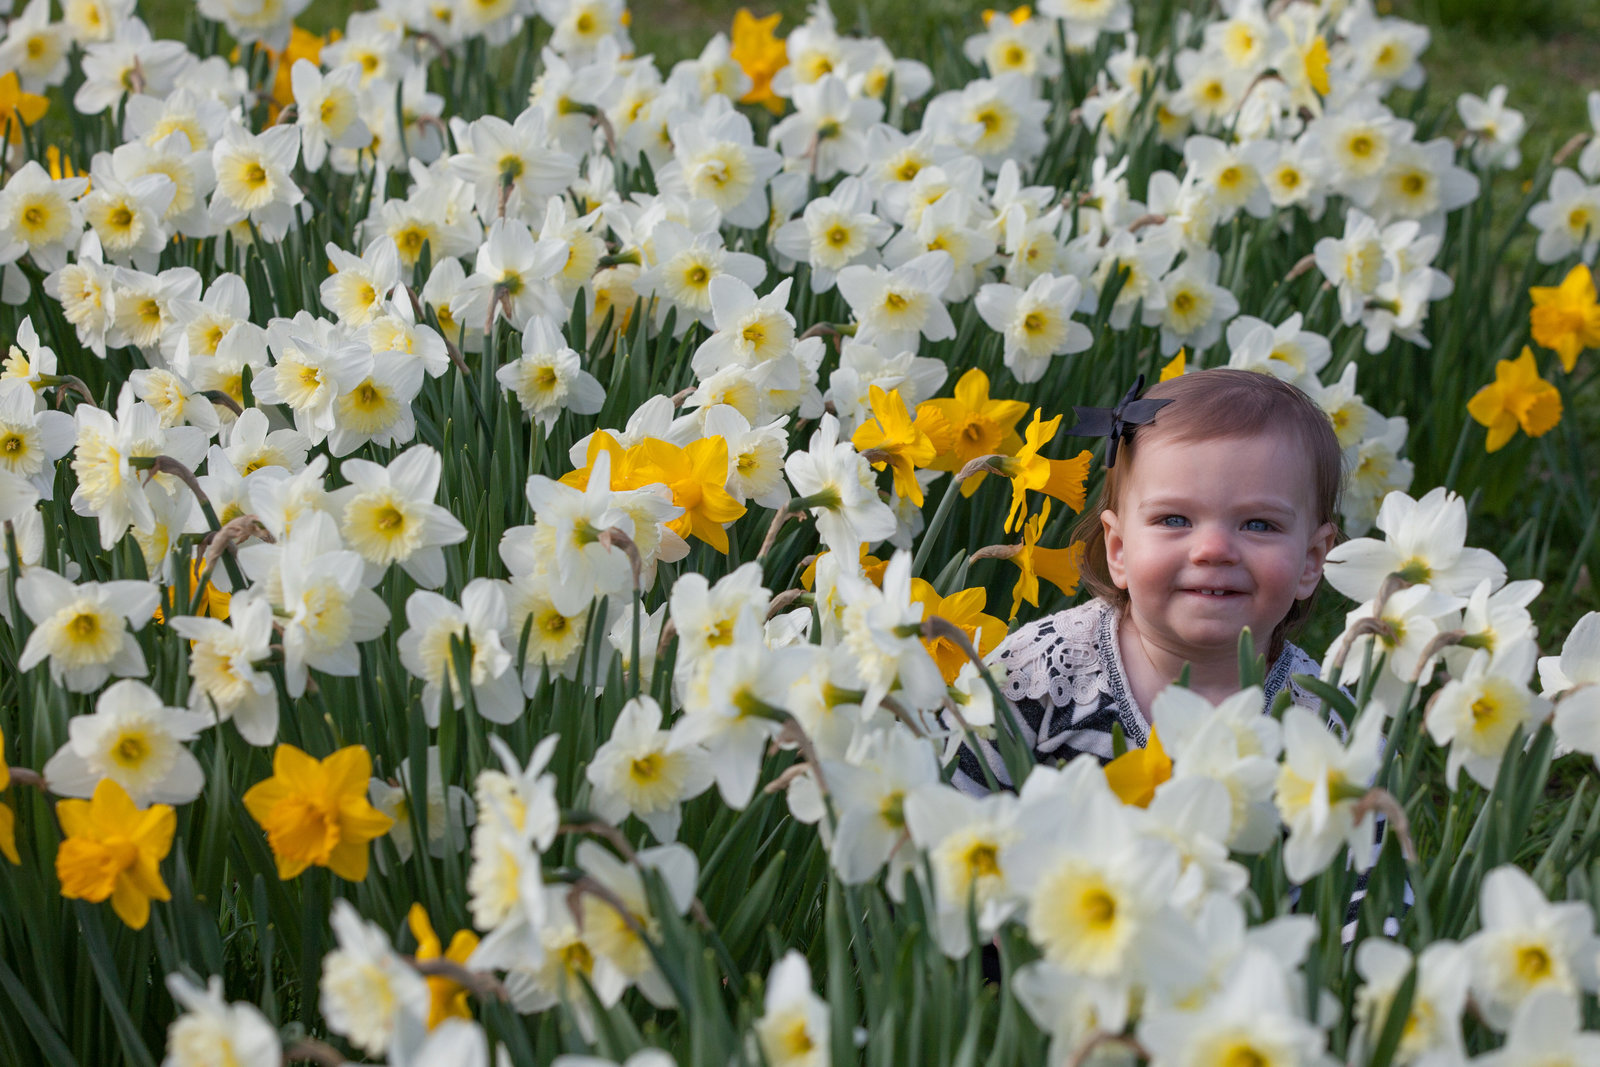 Portrait in Daffodils at The Florence Griswold Museum